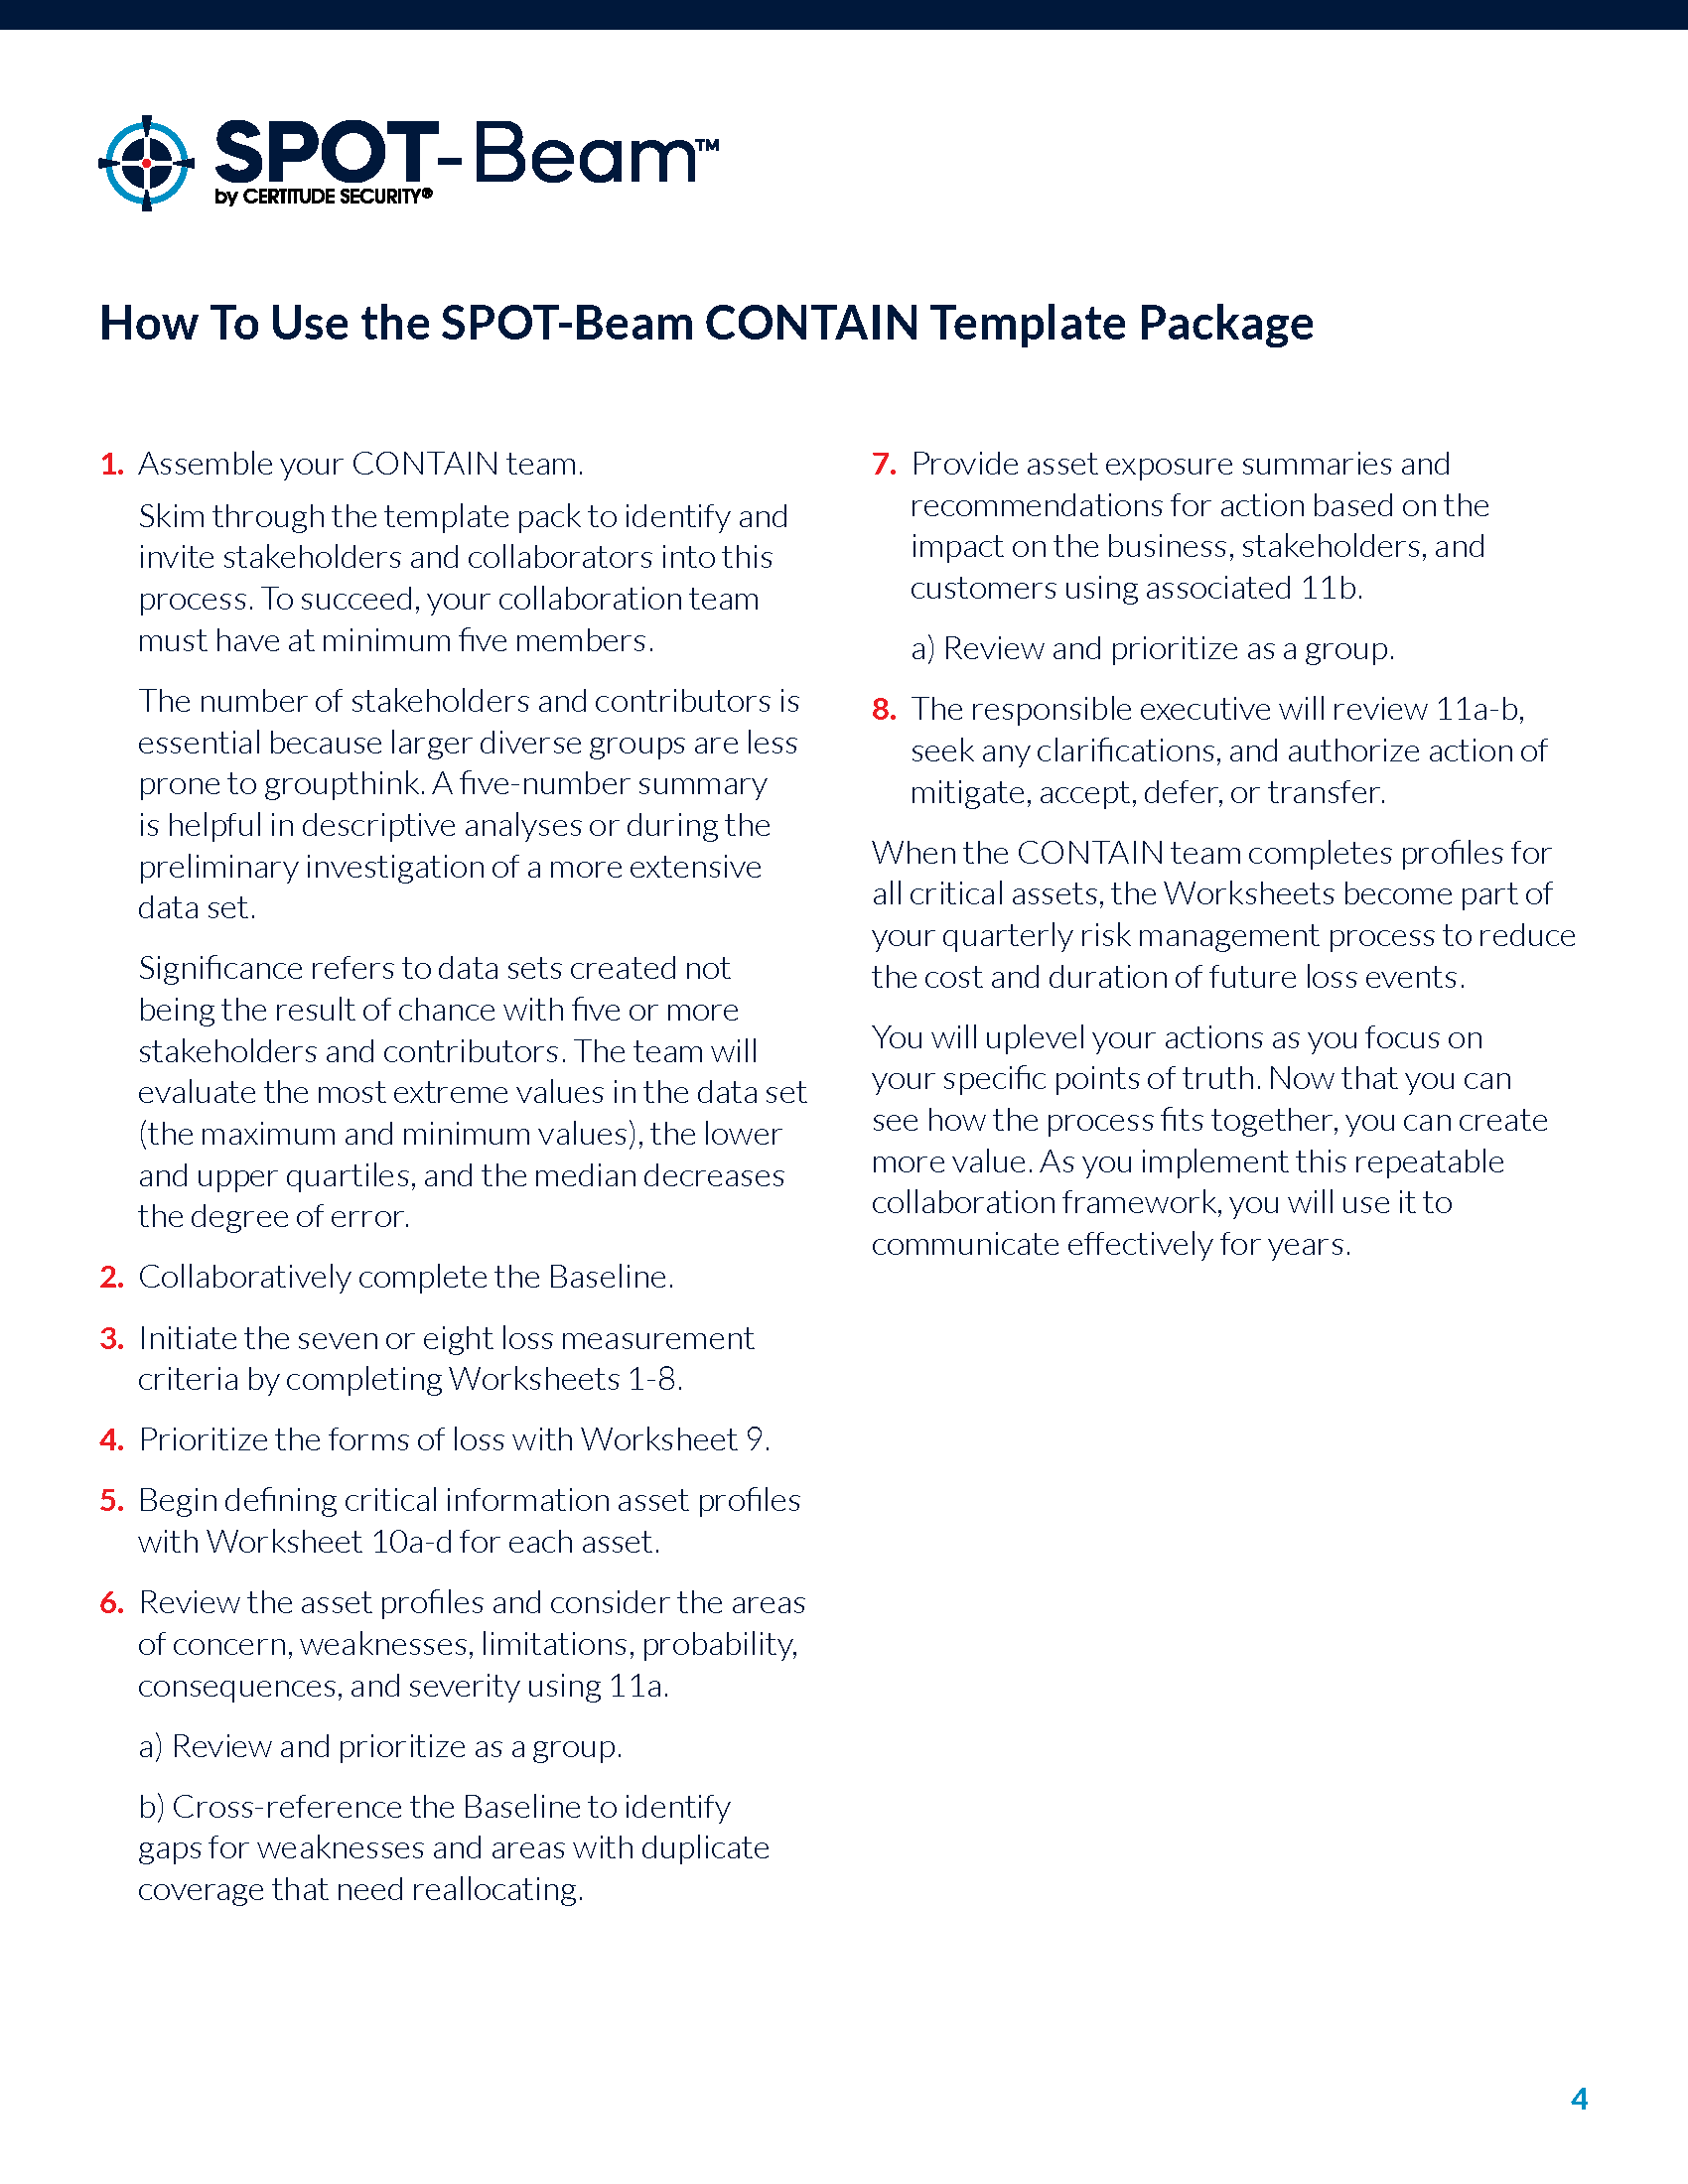 Spot Beam Contain Summary Pages Page 4